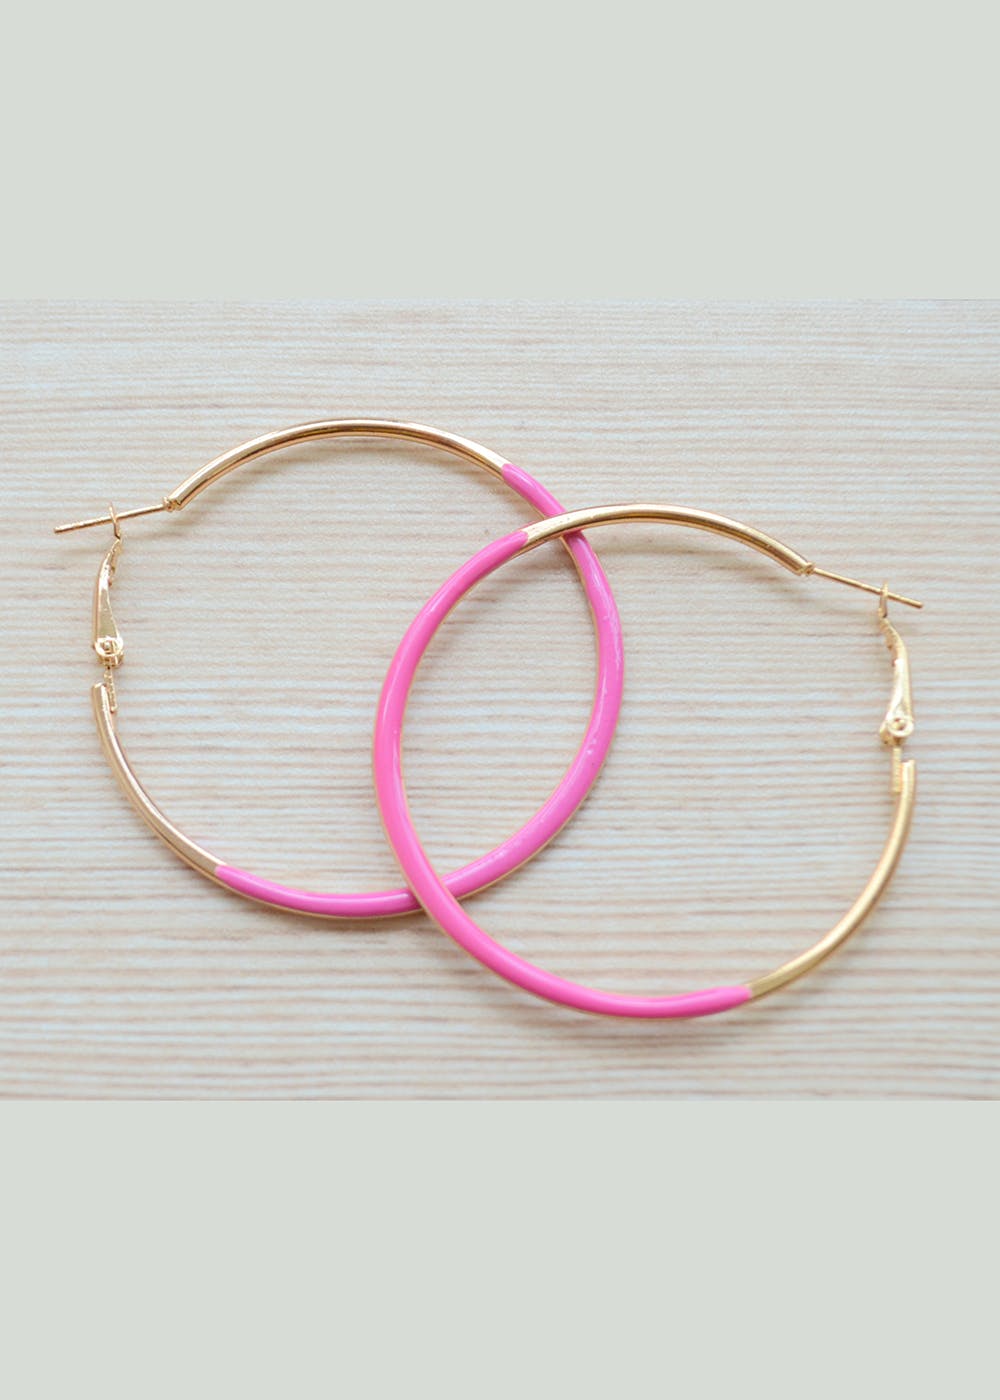 Shop Pink Eleonora Gold Plated Hoop Earrings by RUHHETTE at House of  Designers  HOUSE OF DESIGNERS